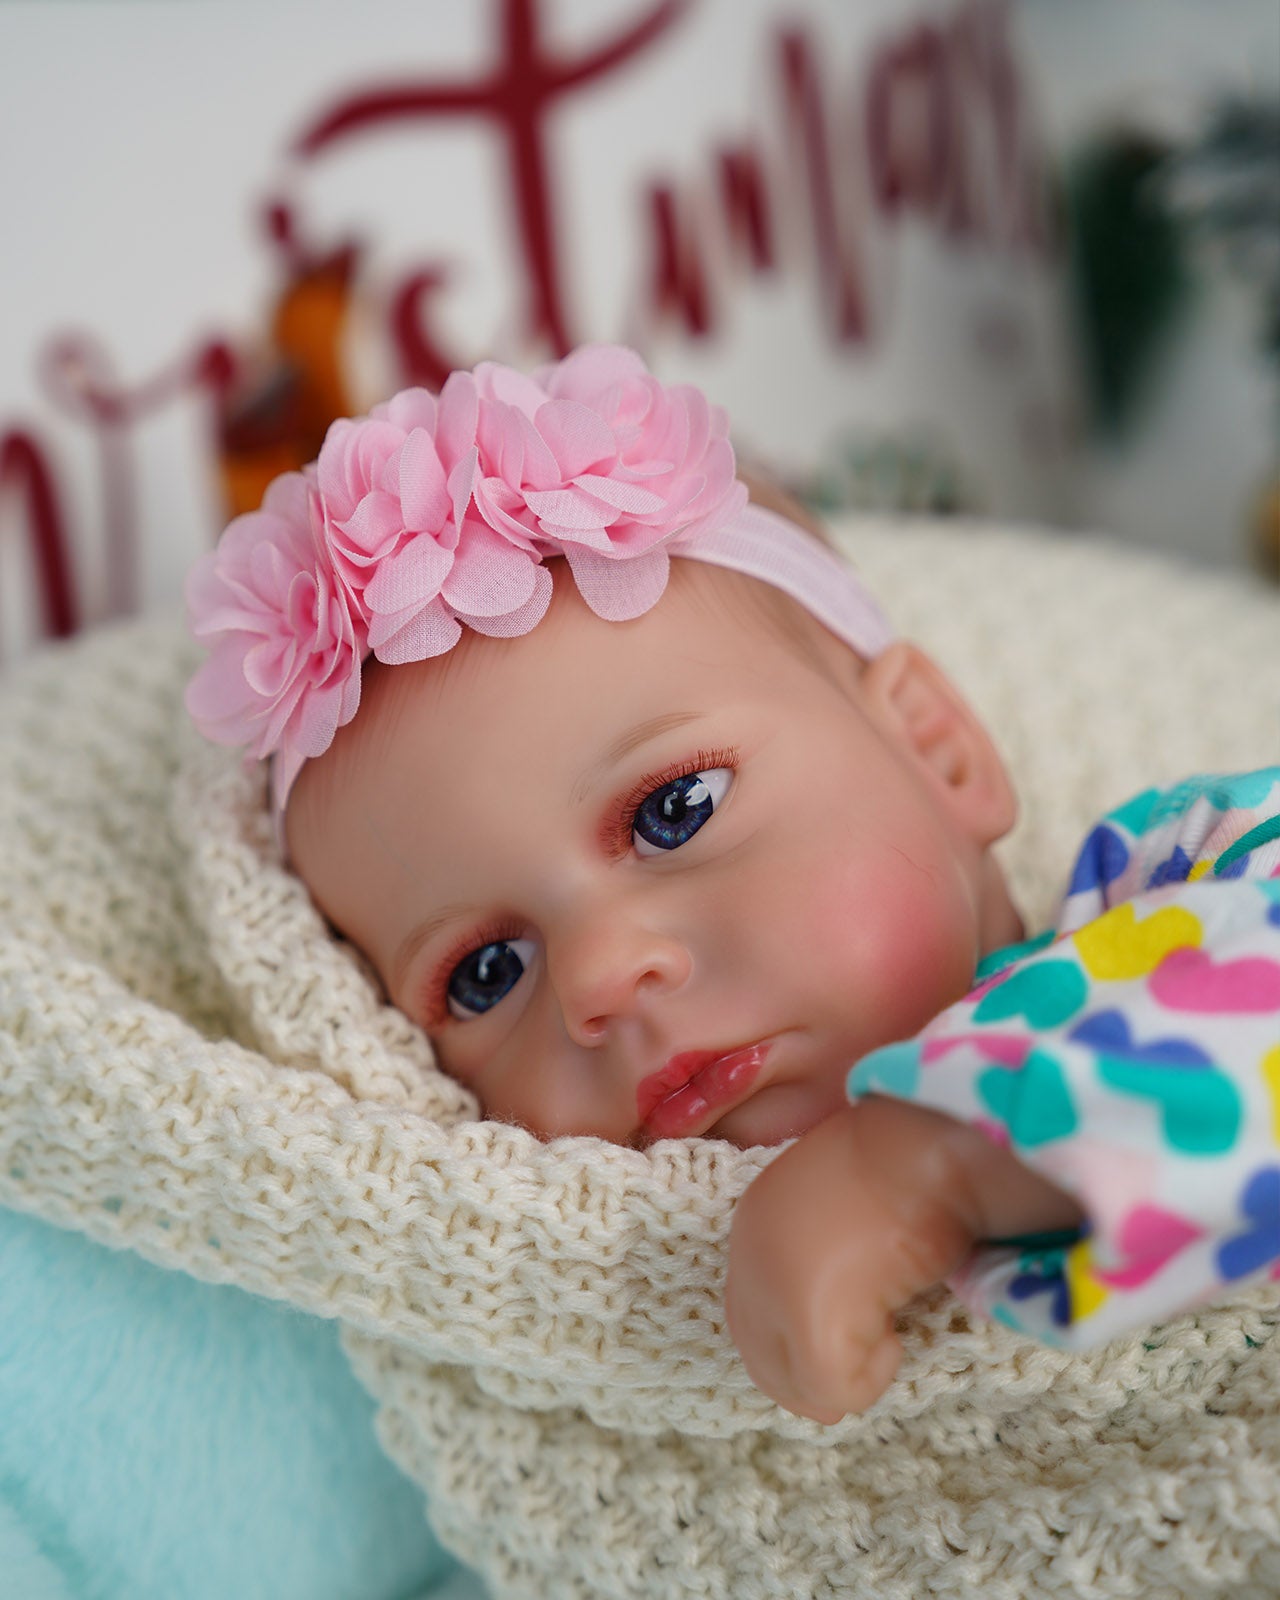 Basia - 20" Reborn Baby Dolls Realistic Newborn Girl with Cute Little Button Nose